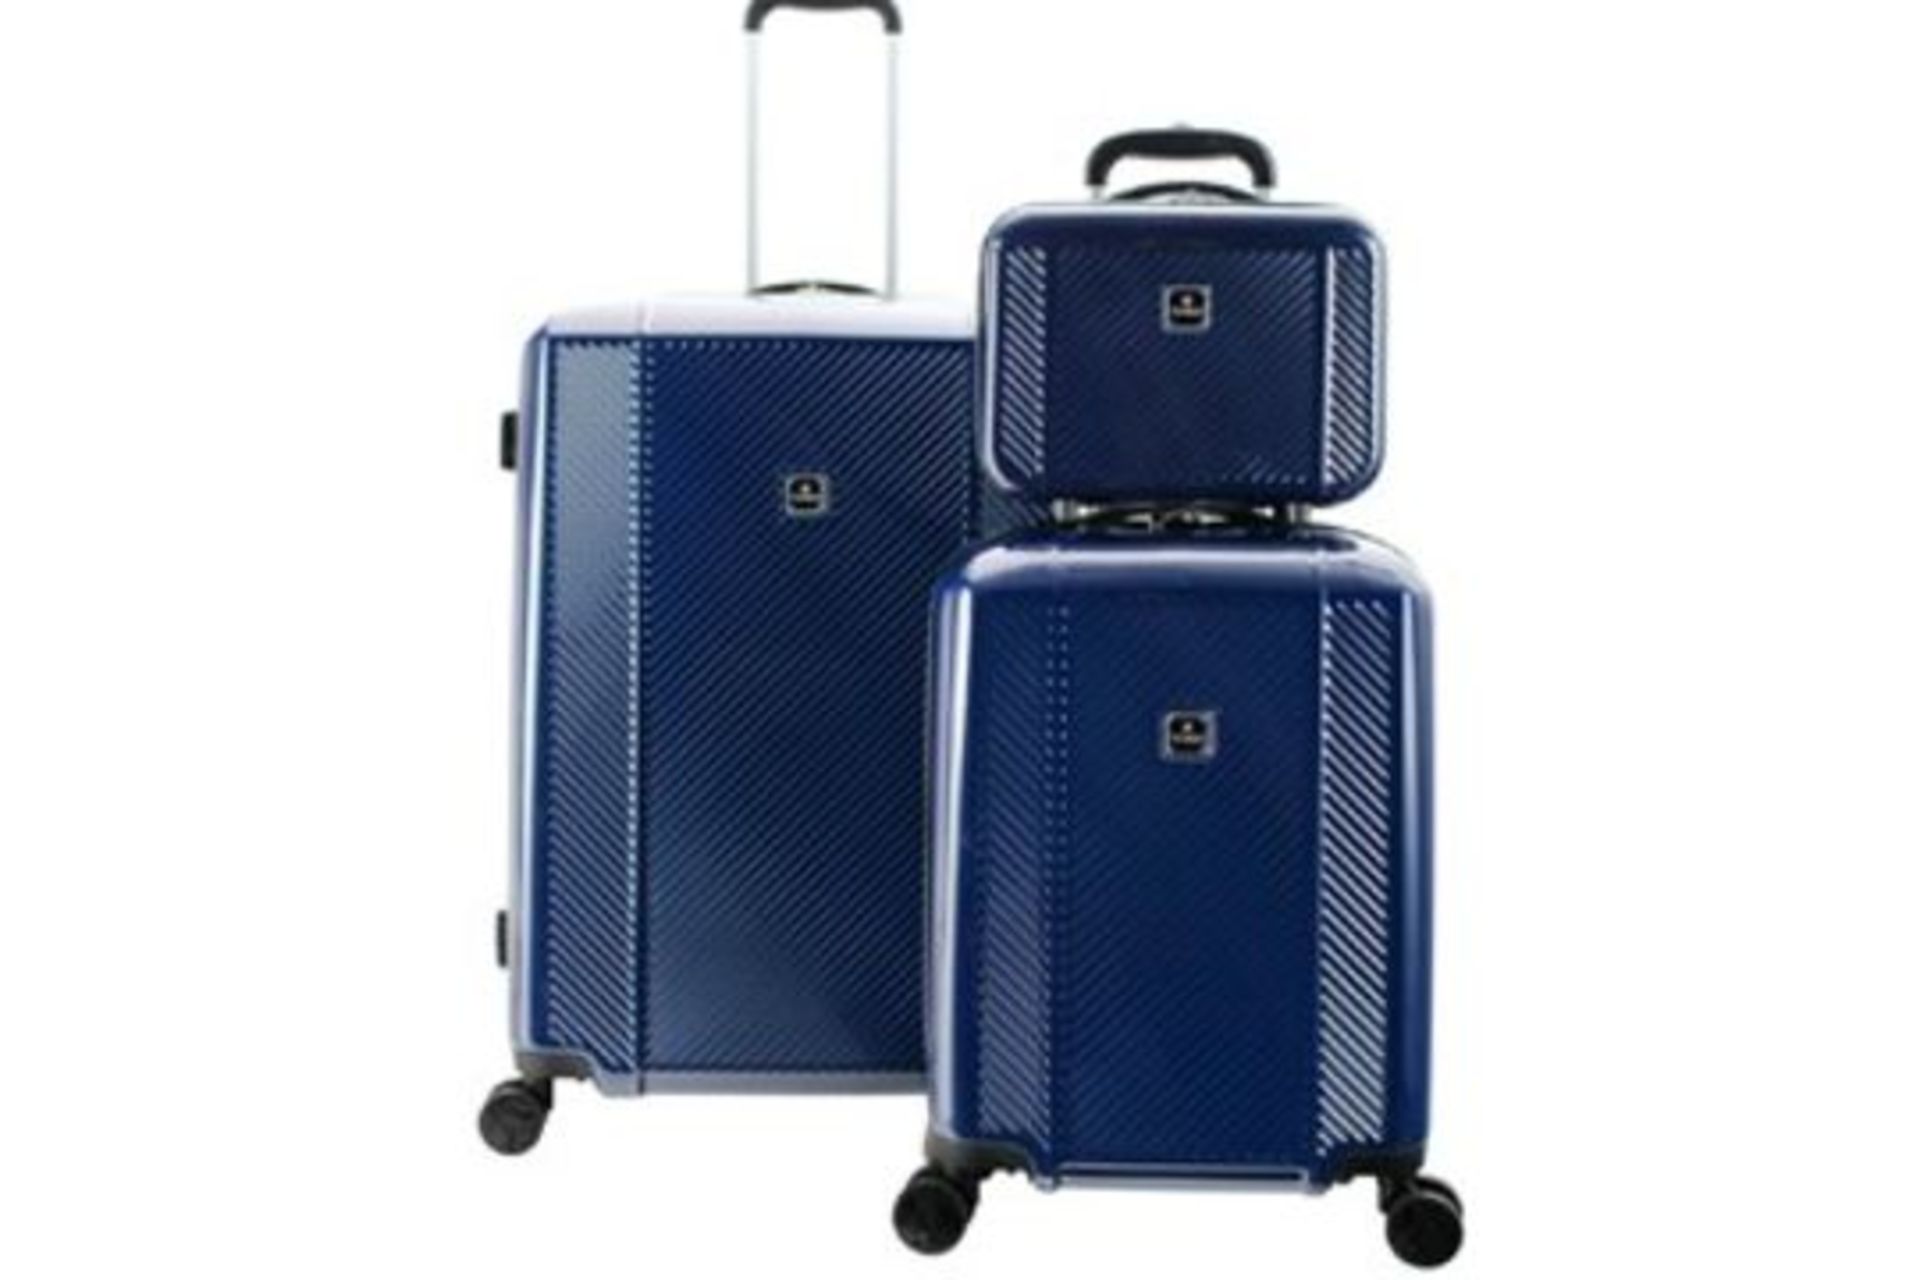 3 x New Boxed 3 Piece Sets of TAG Spectrum Hardside Luggage Set. (BLUE). RRP £199.99 per set. Get - Image 2 of 2